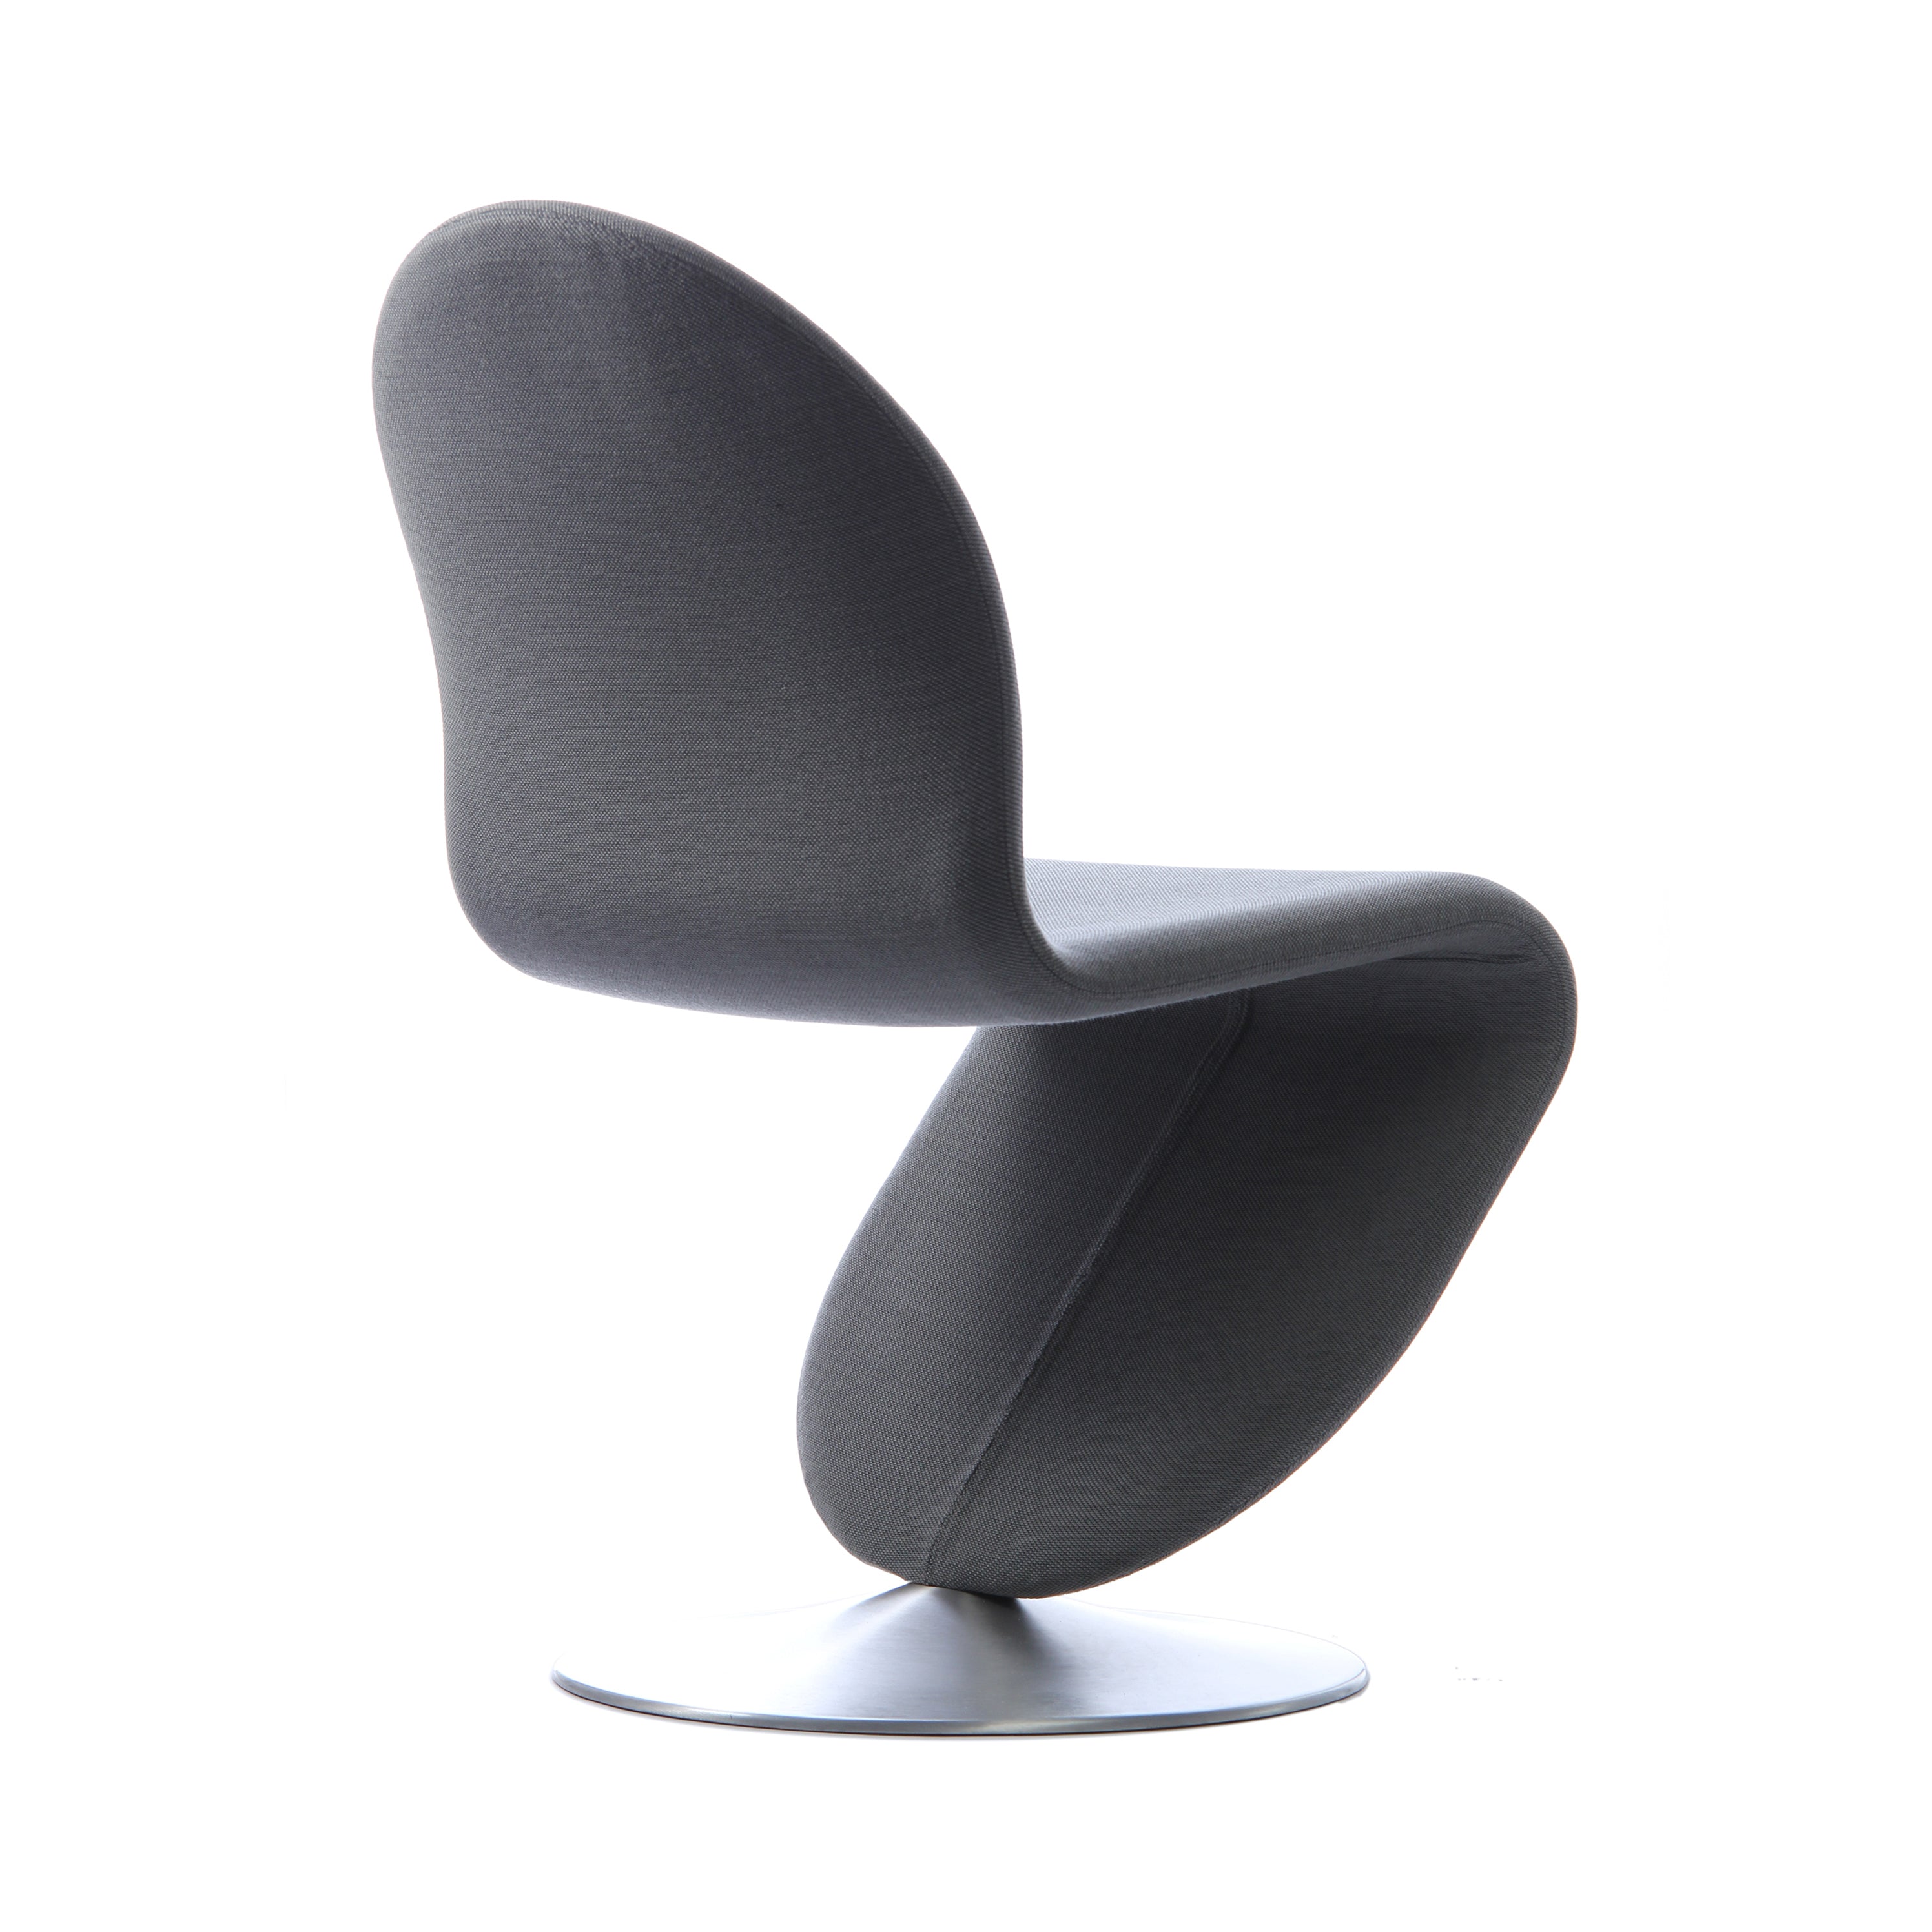 System 1-2-3 Dining Chair: Standard + Round